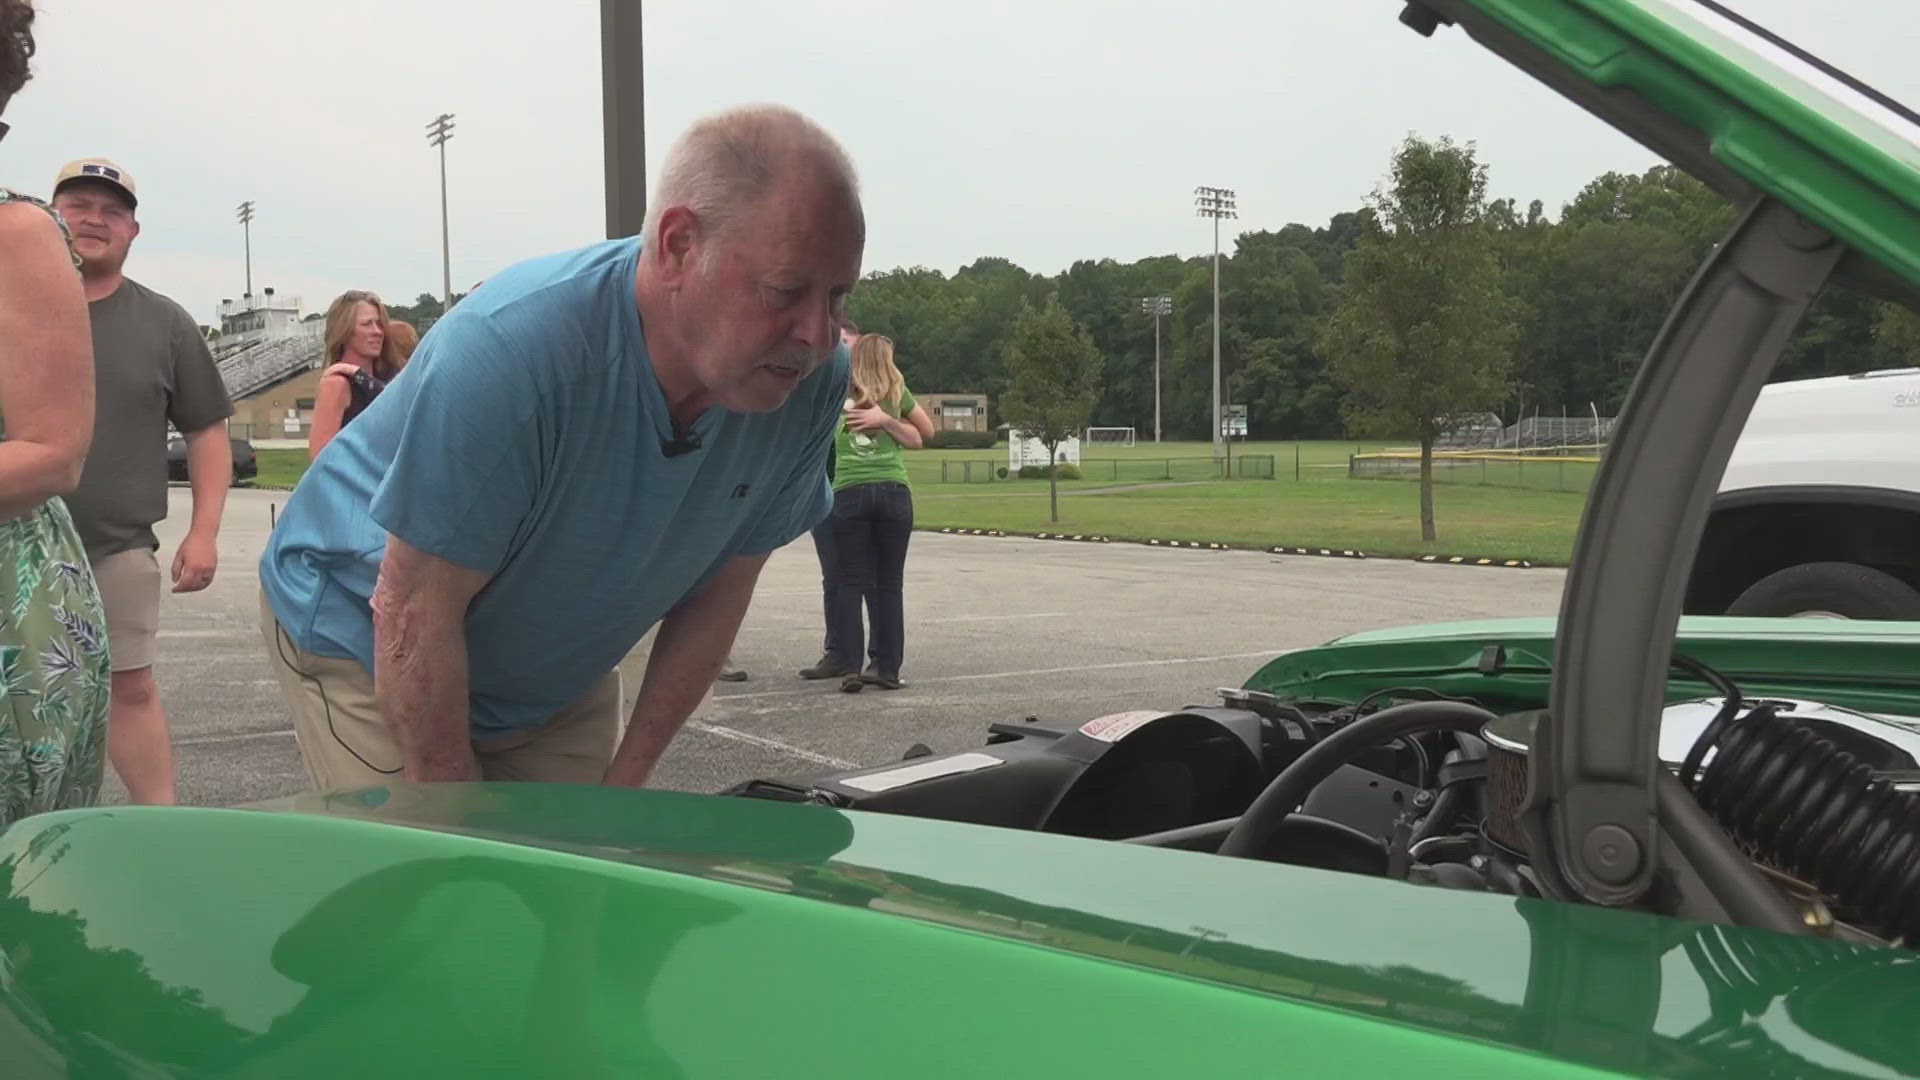 When Stephen Milliner pulled into the Floyd Central High School parking lot on Tuesday, he wasn’t expecting the huge surprise that was waiting for him.